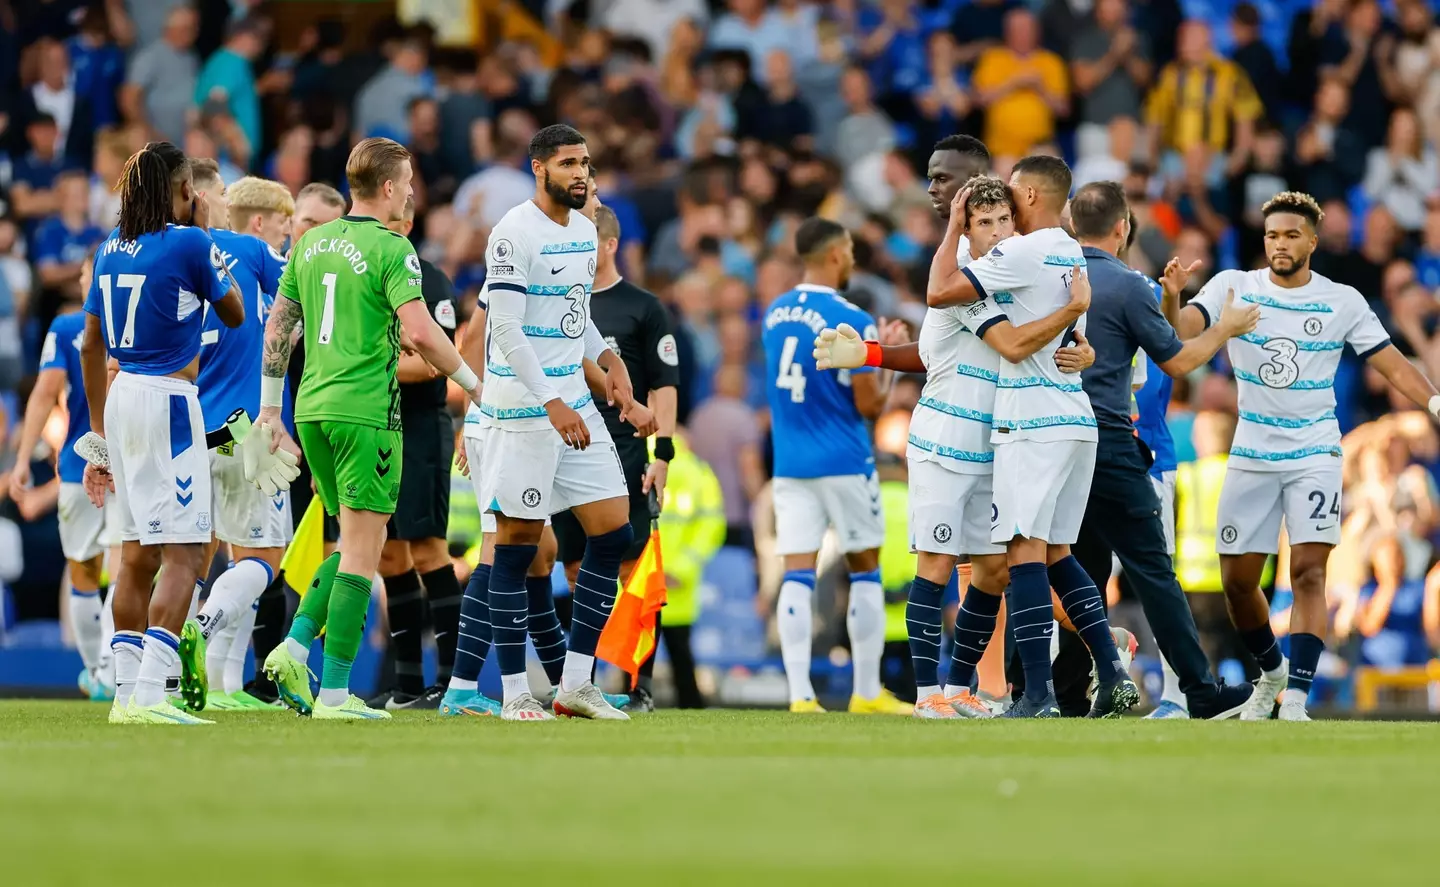 Chelsea celebrate their win against Everton. (Alamy)